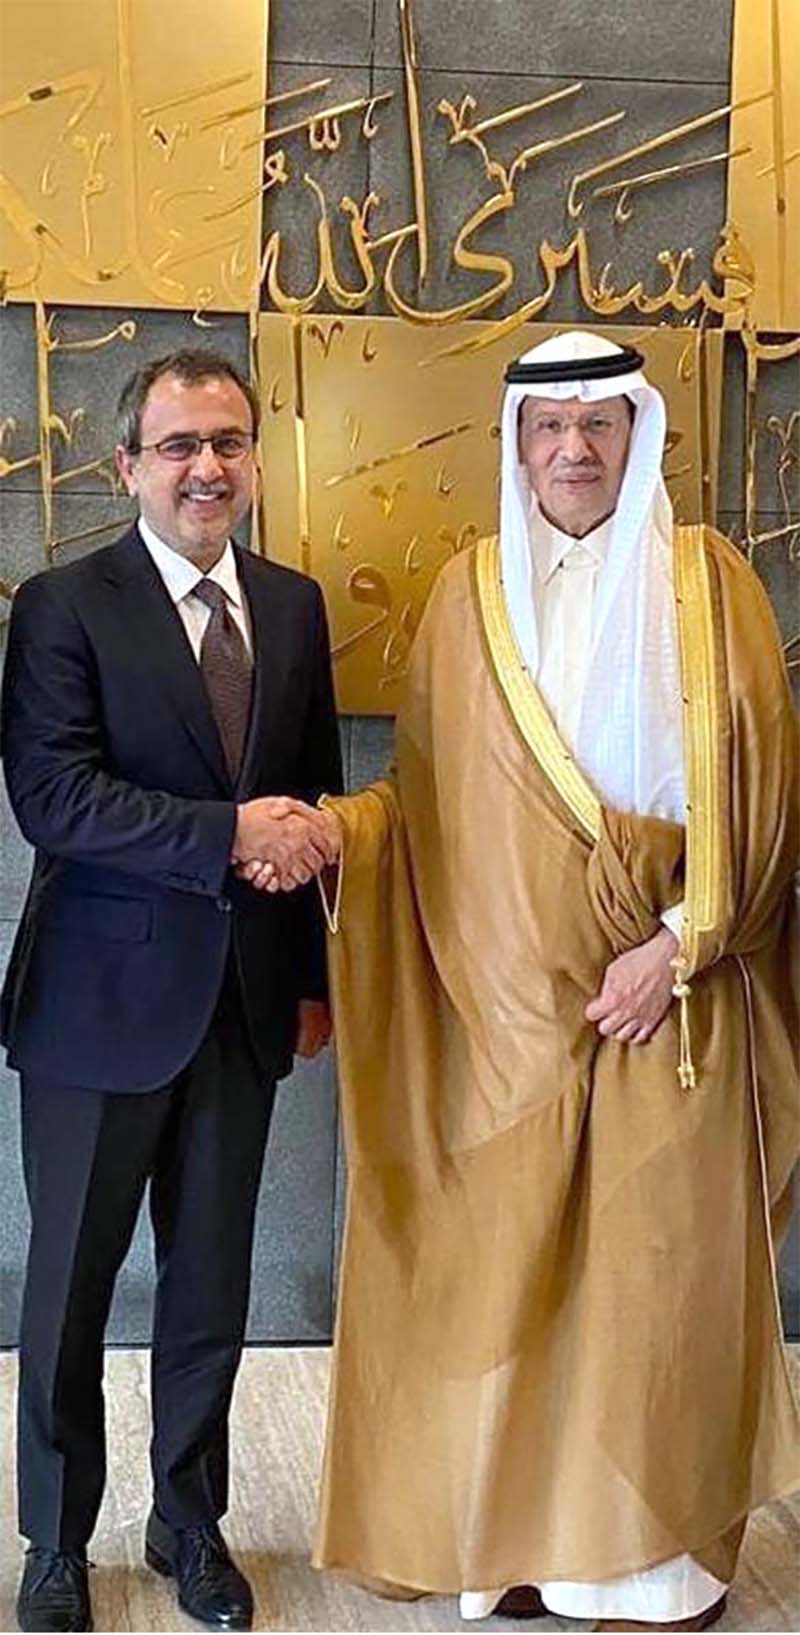 Minister for Power Sardar Awais Ahmed Khan Leghari held a meeting with the Saudi Minister of Energy, HRH Prince Abdulaziz bin Salman Al-Saud. Both ministers agreed to exchange expertise to facilitate rapid economic growth in their respective countries by making the energy sector more efficient. They also decided to continue the exchange of experts of the energy sector and other key economic sectors within their countries in order to arrive at a clear strategy of improving Pakistan's energy landscape